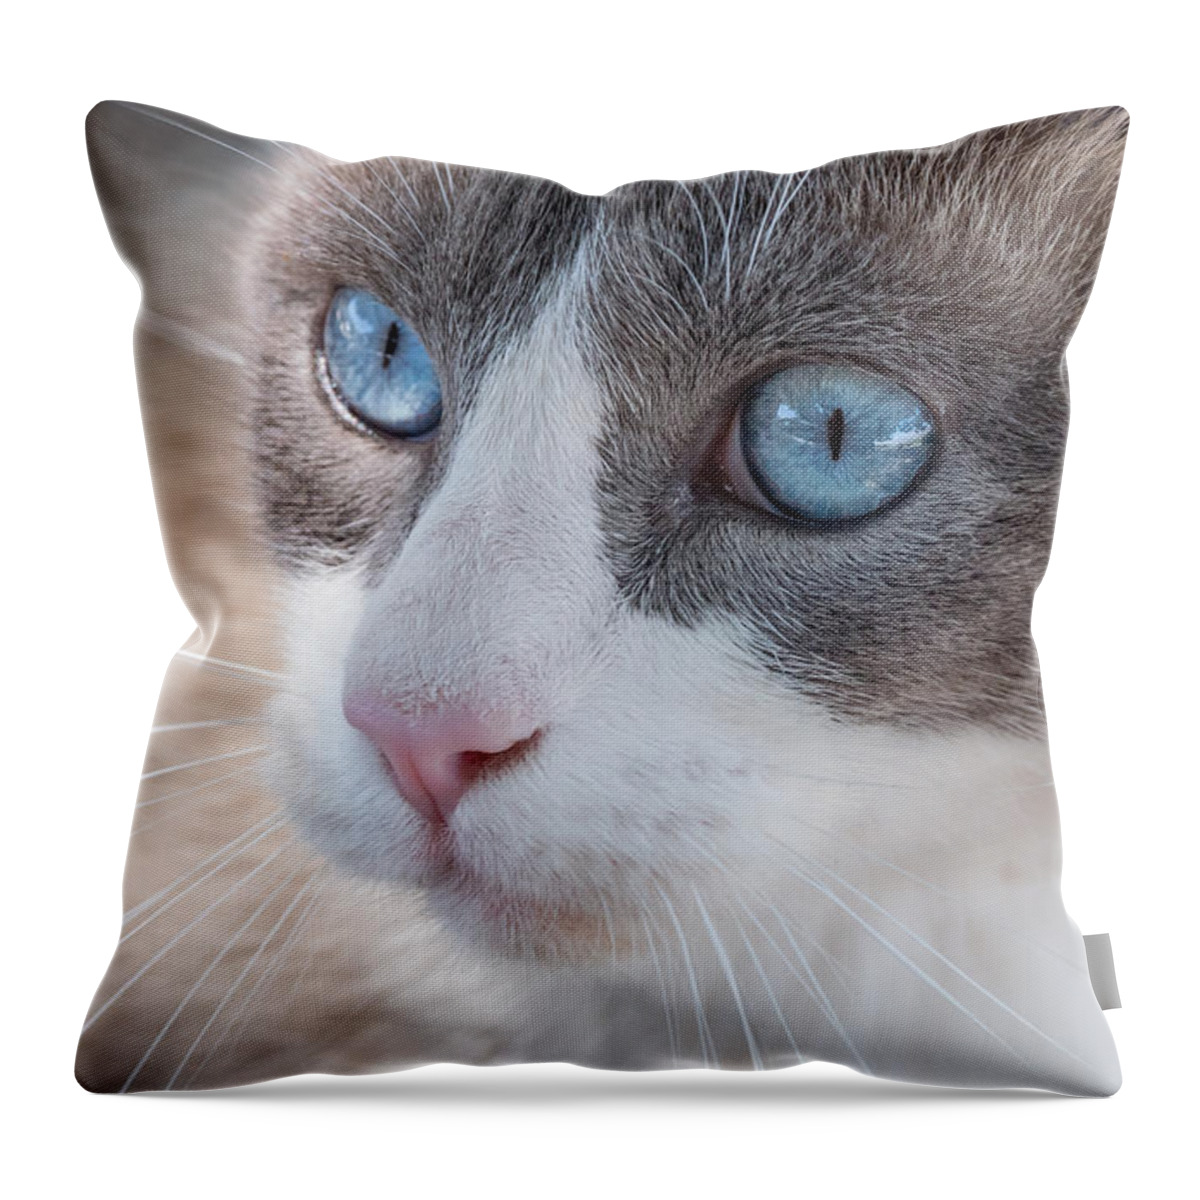 Cat Throw Pillow featuring the photograph Whiskers by Derek Dean